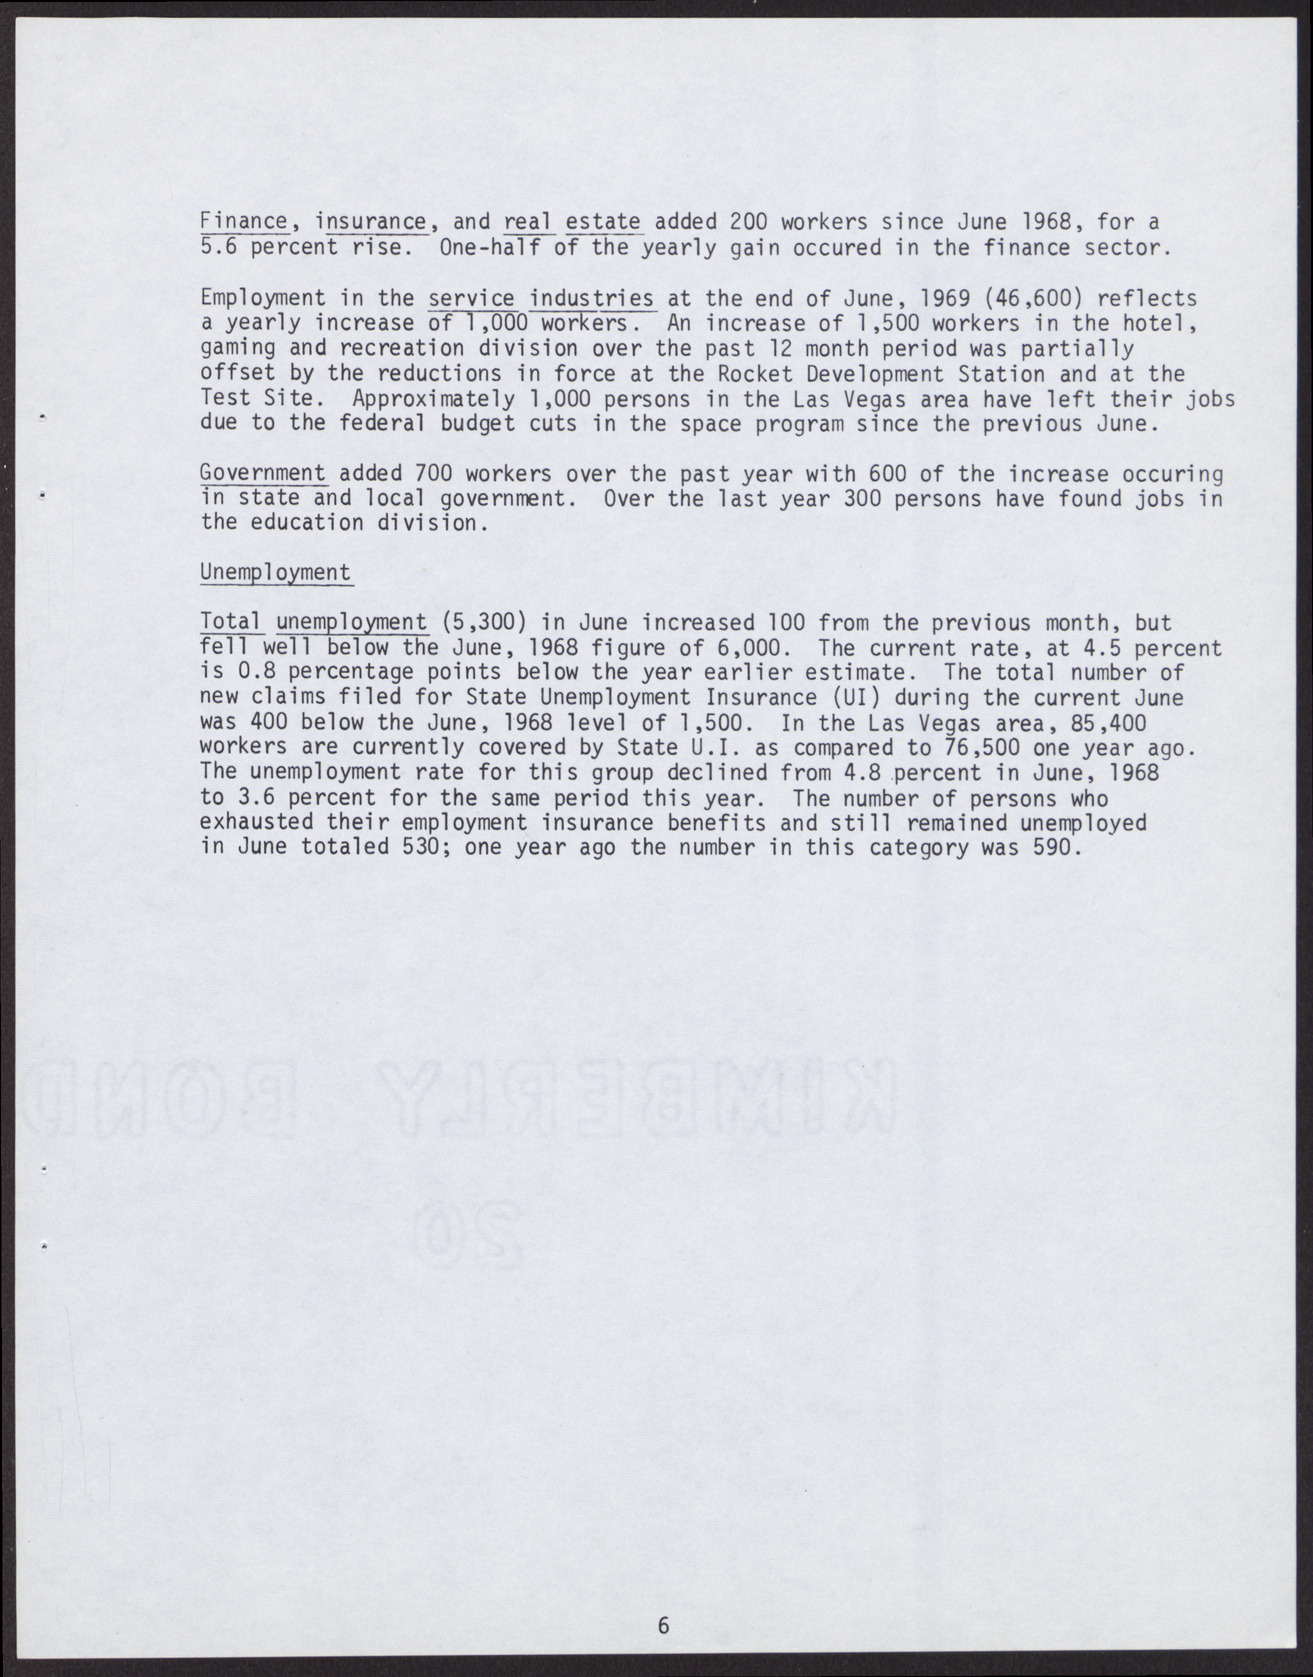 Semi-annual Area Manpower Review (16 pages), Fall 1969, page 9